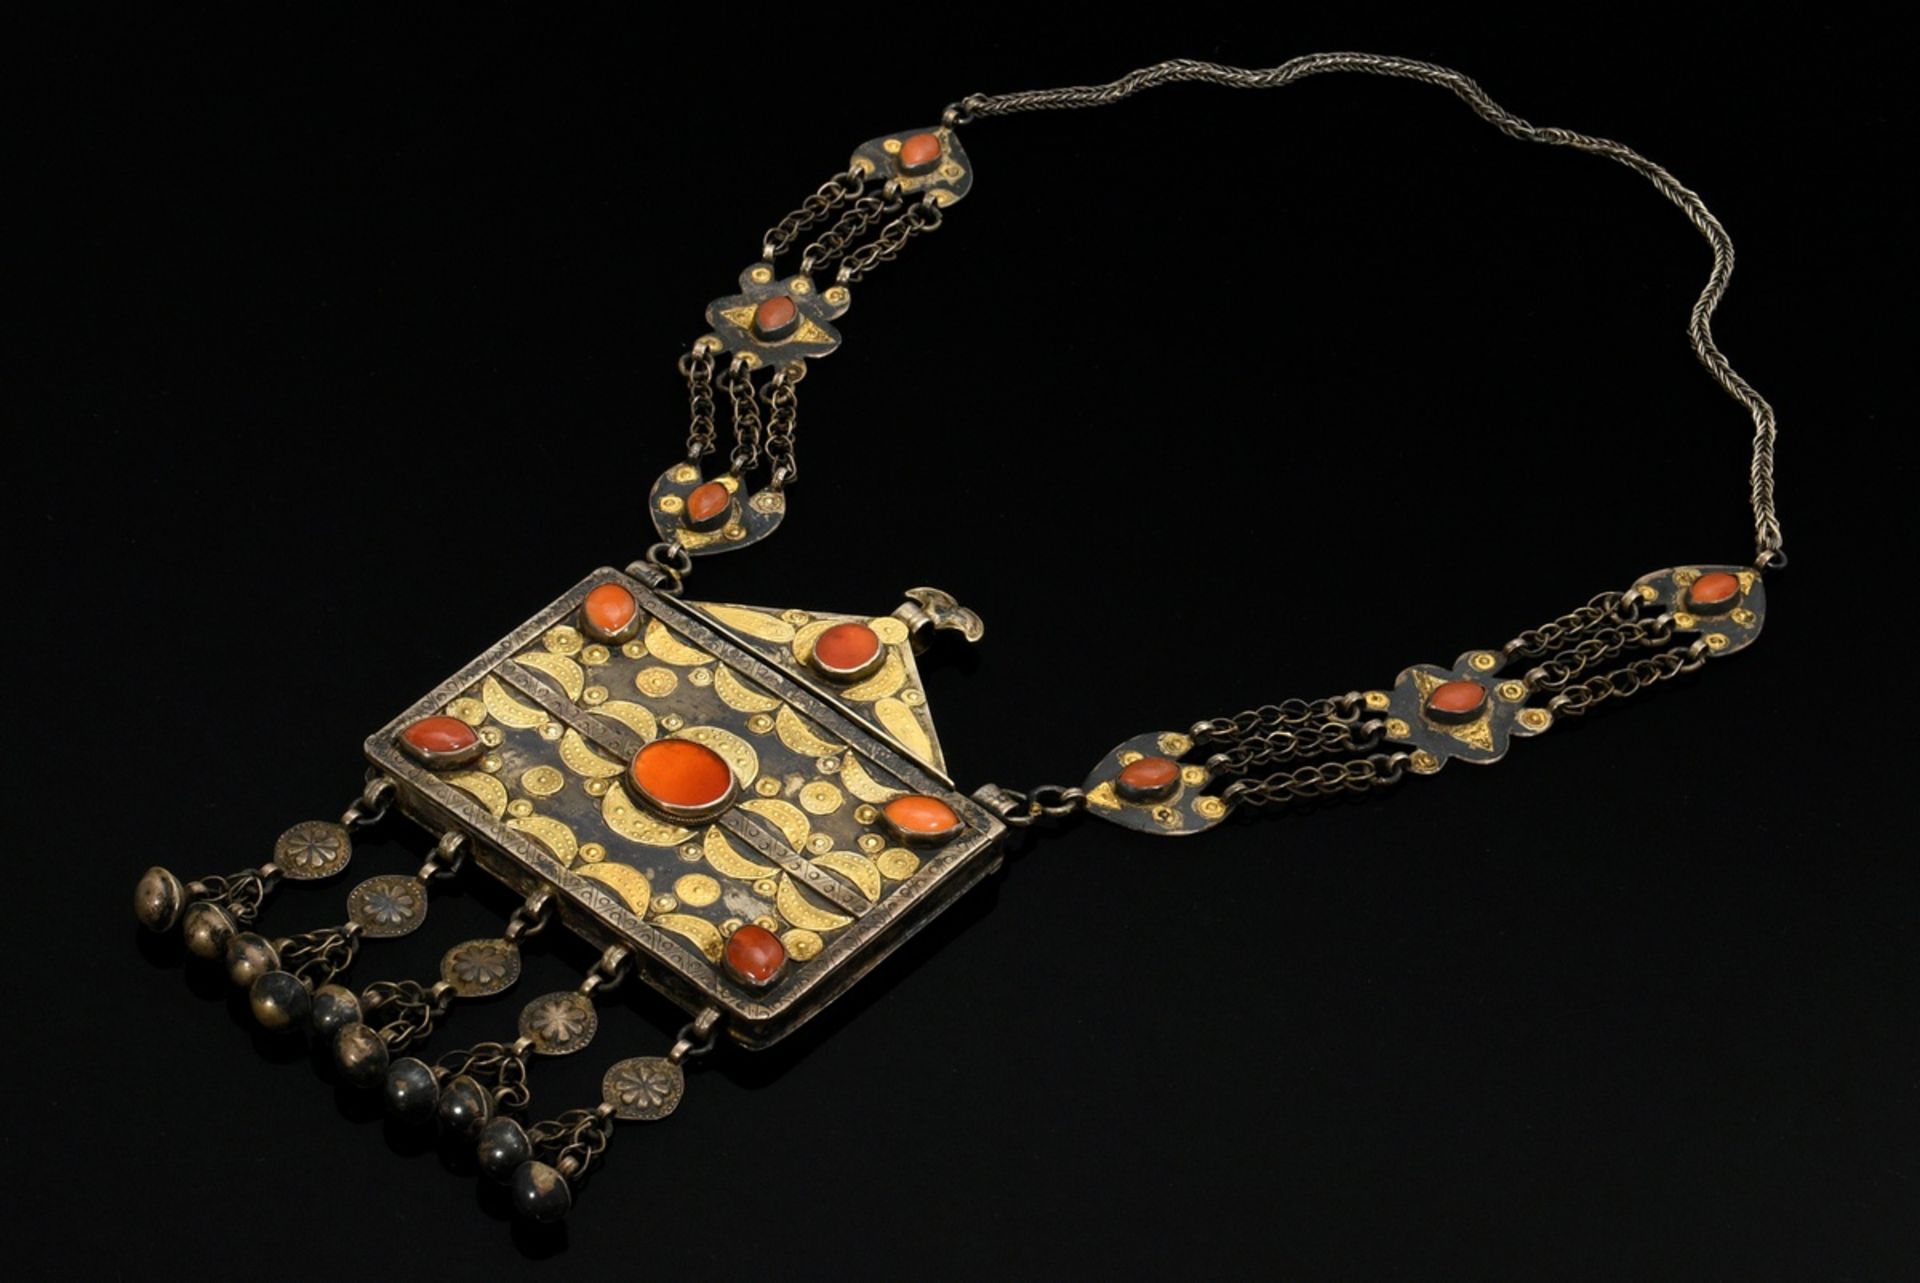 Yomud Turkmen necklace with openable amulet container "Kümsch Doga", chased crescent and sun-shaped - Image 2 of 9